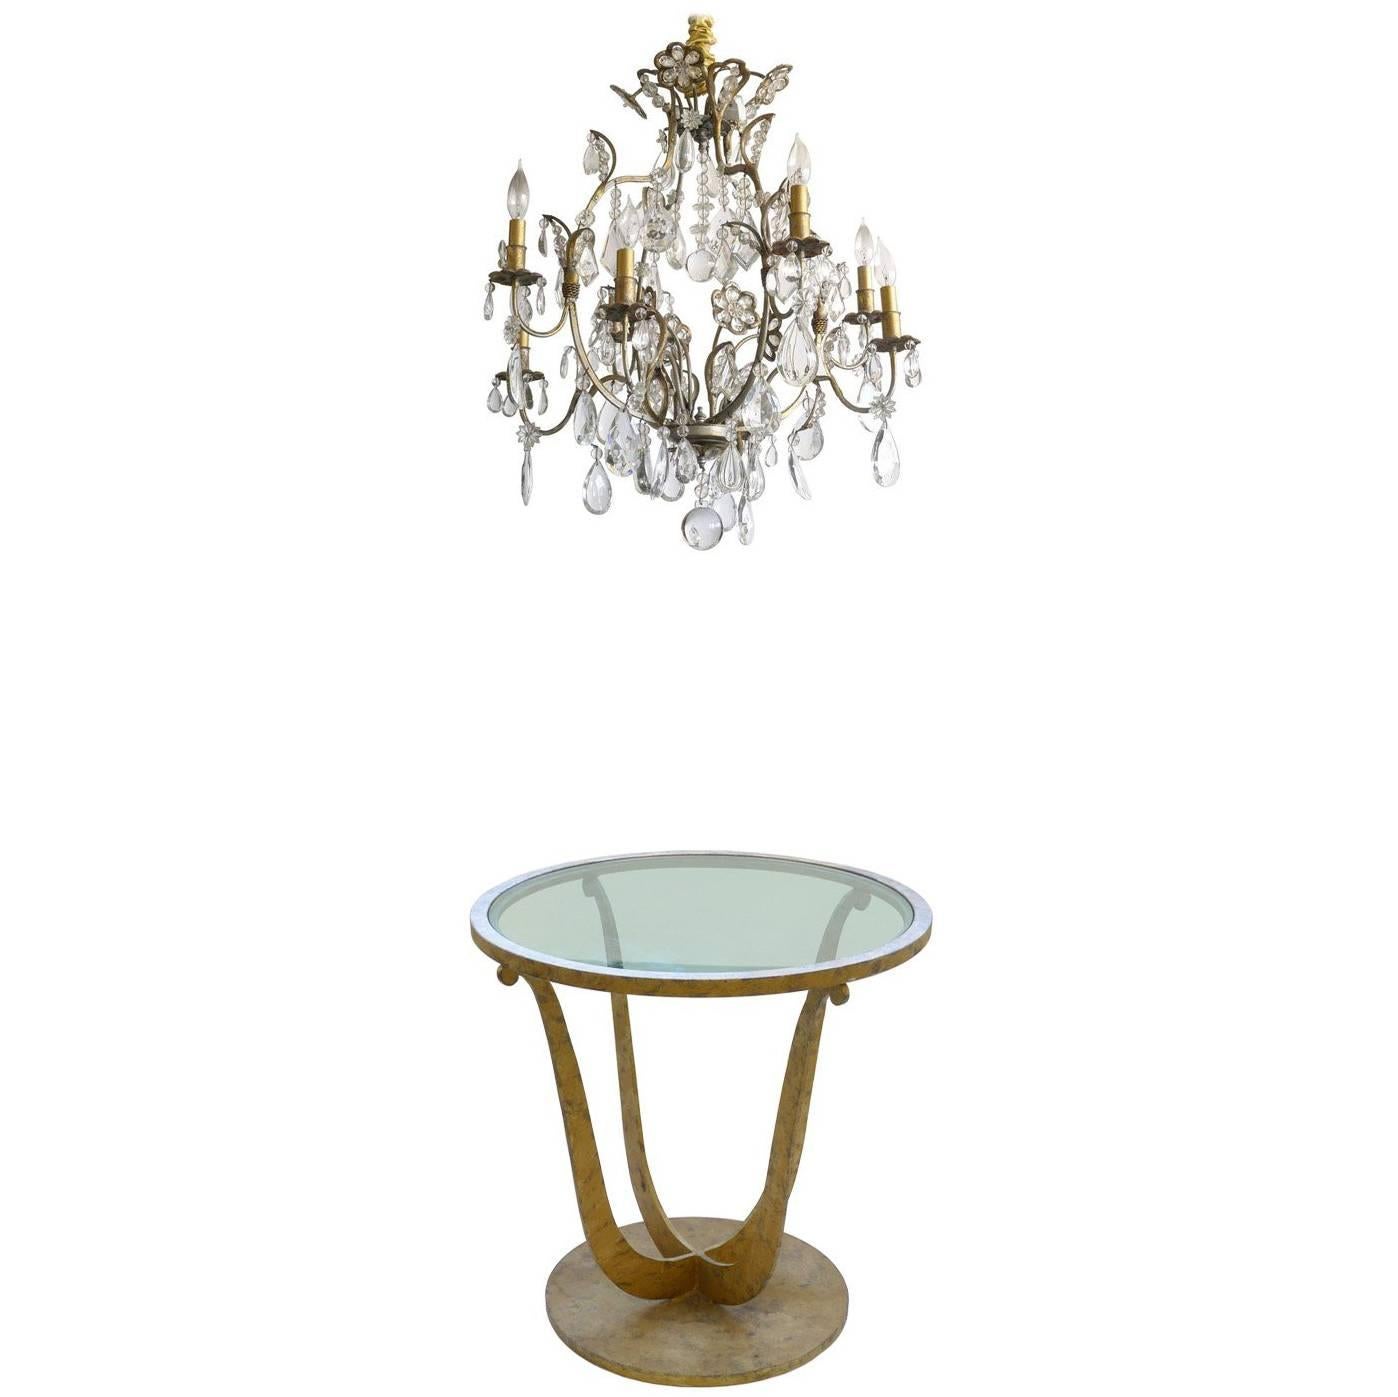 Art Deco Gilt Metal Round Gueridon Table with Hollywood Regency Chandelier For Sale